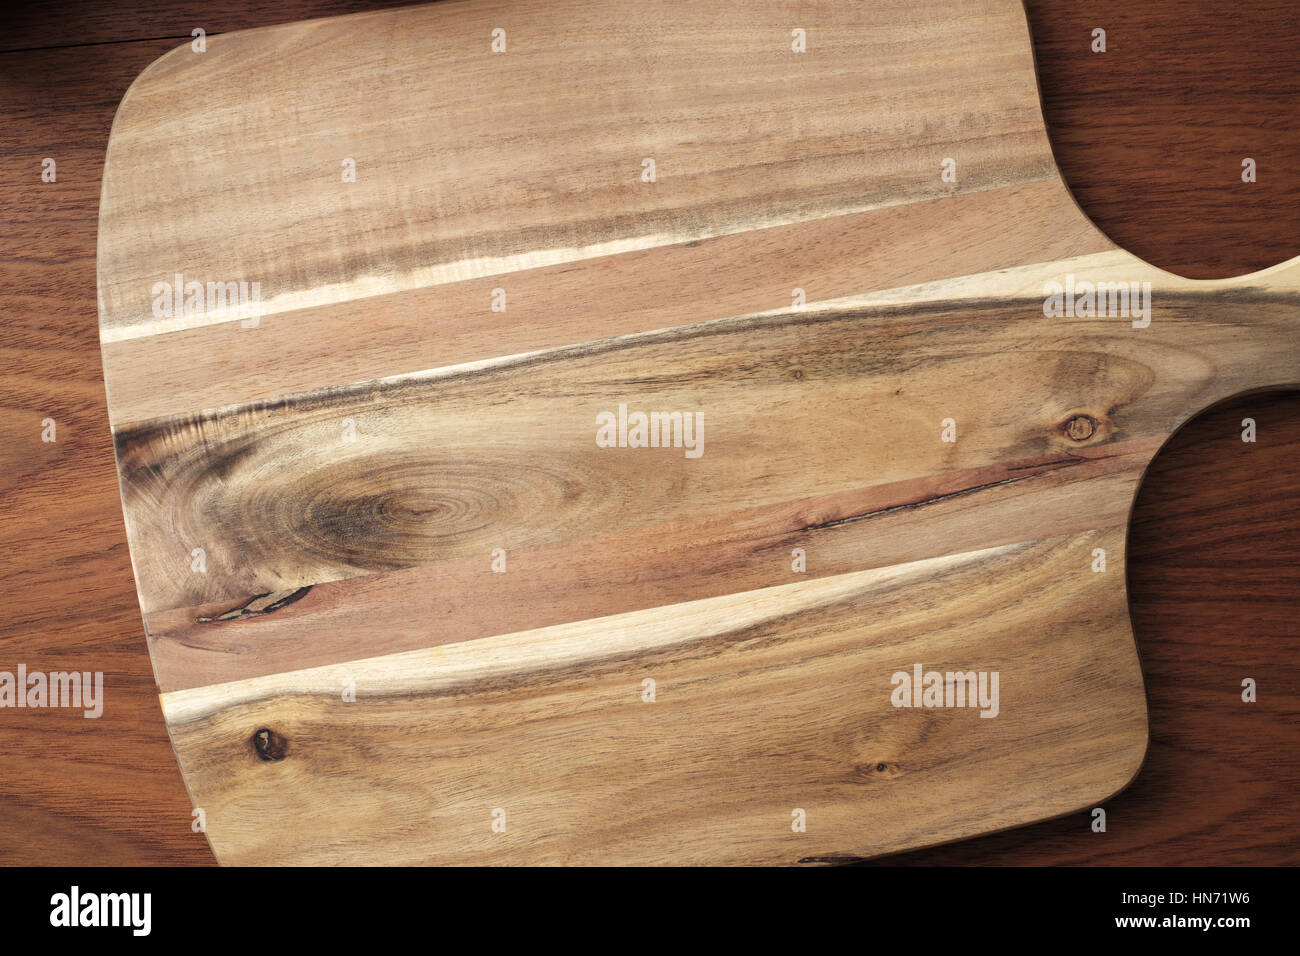 Cutting board on brown wooden table Stock Photo